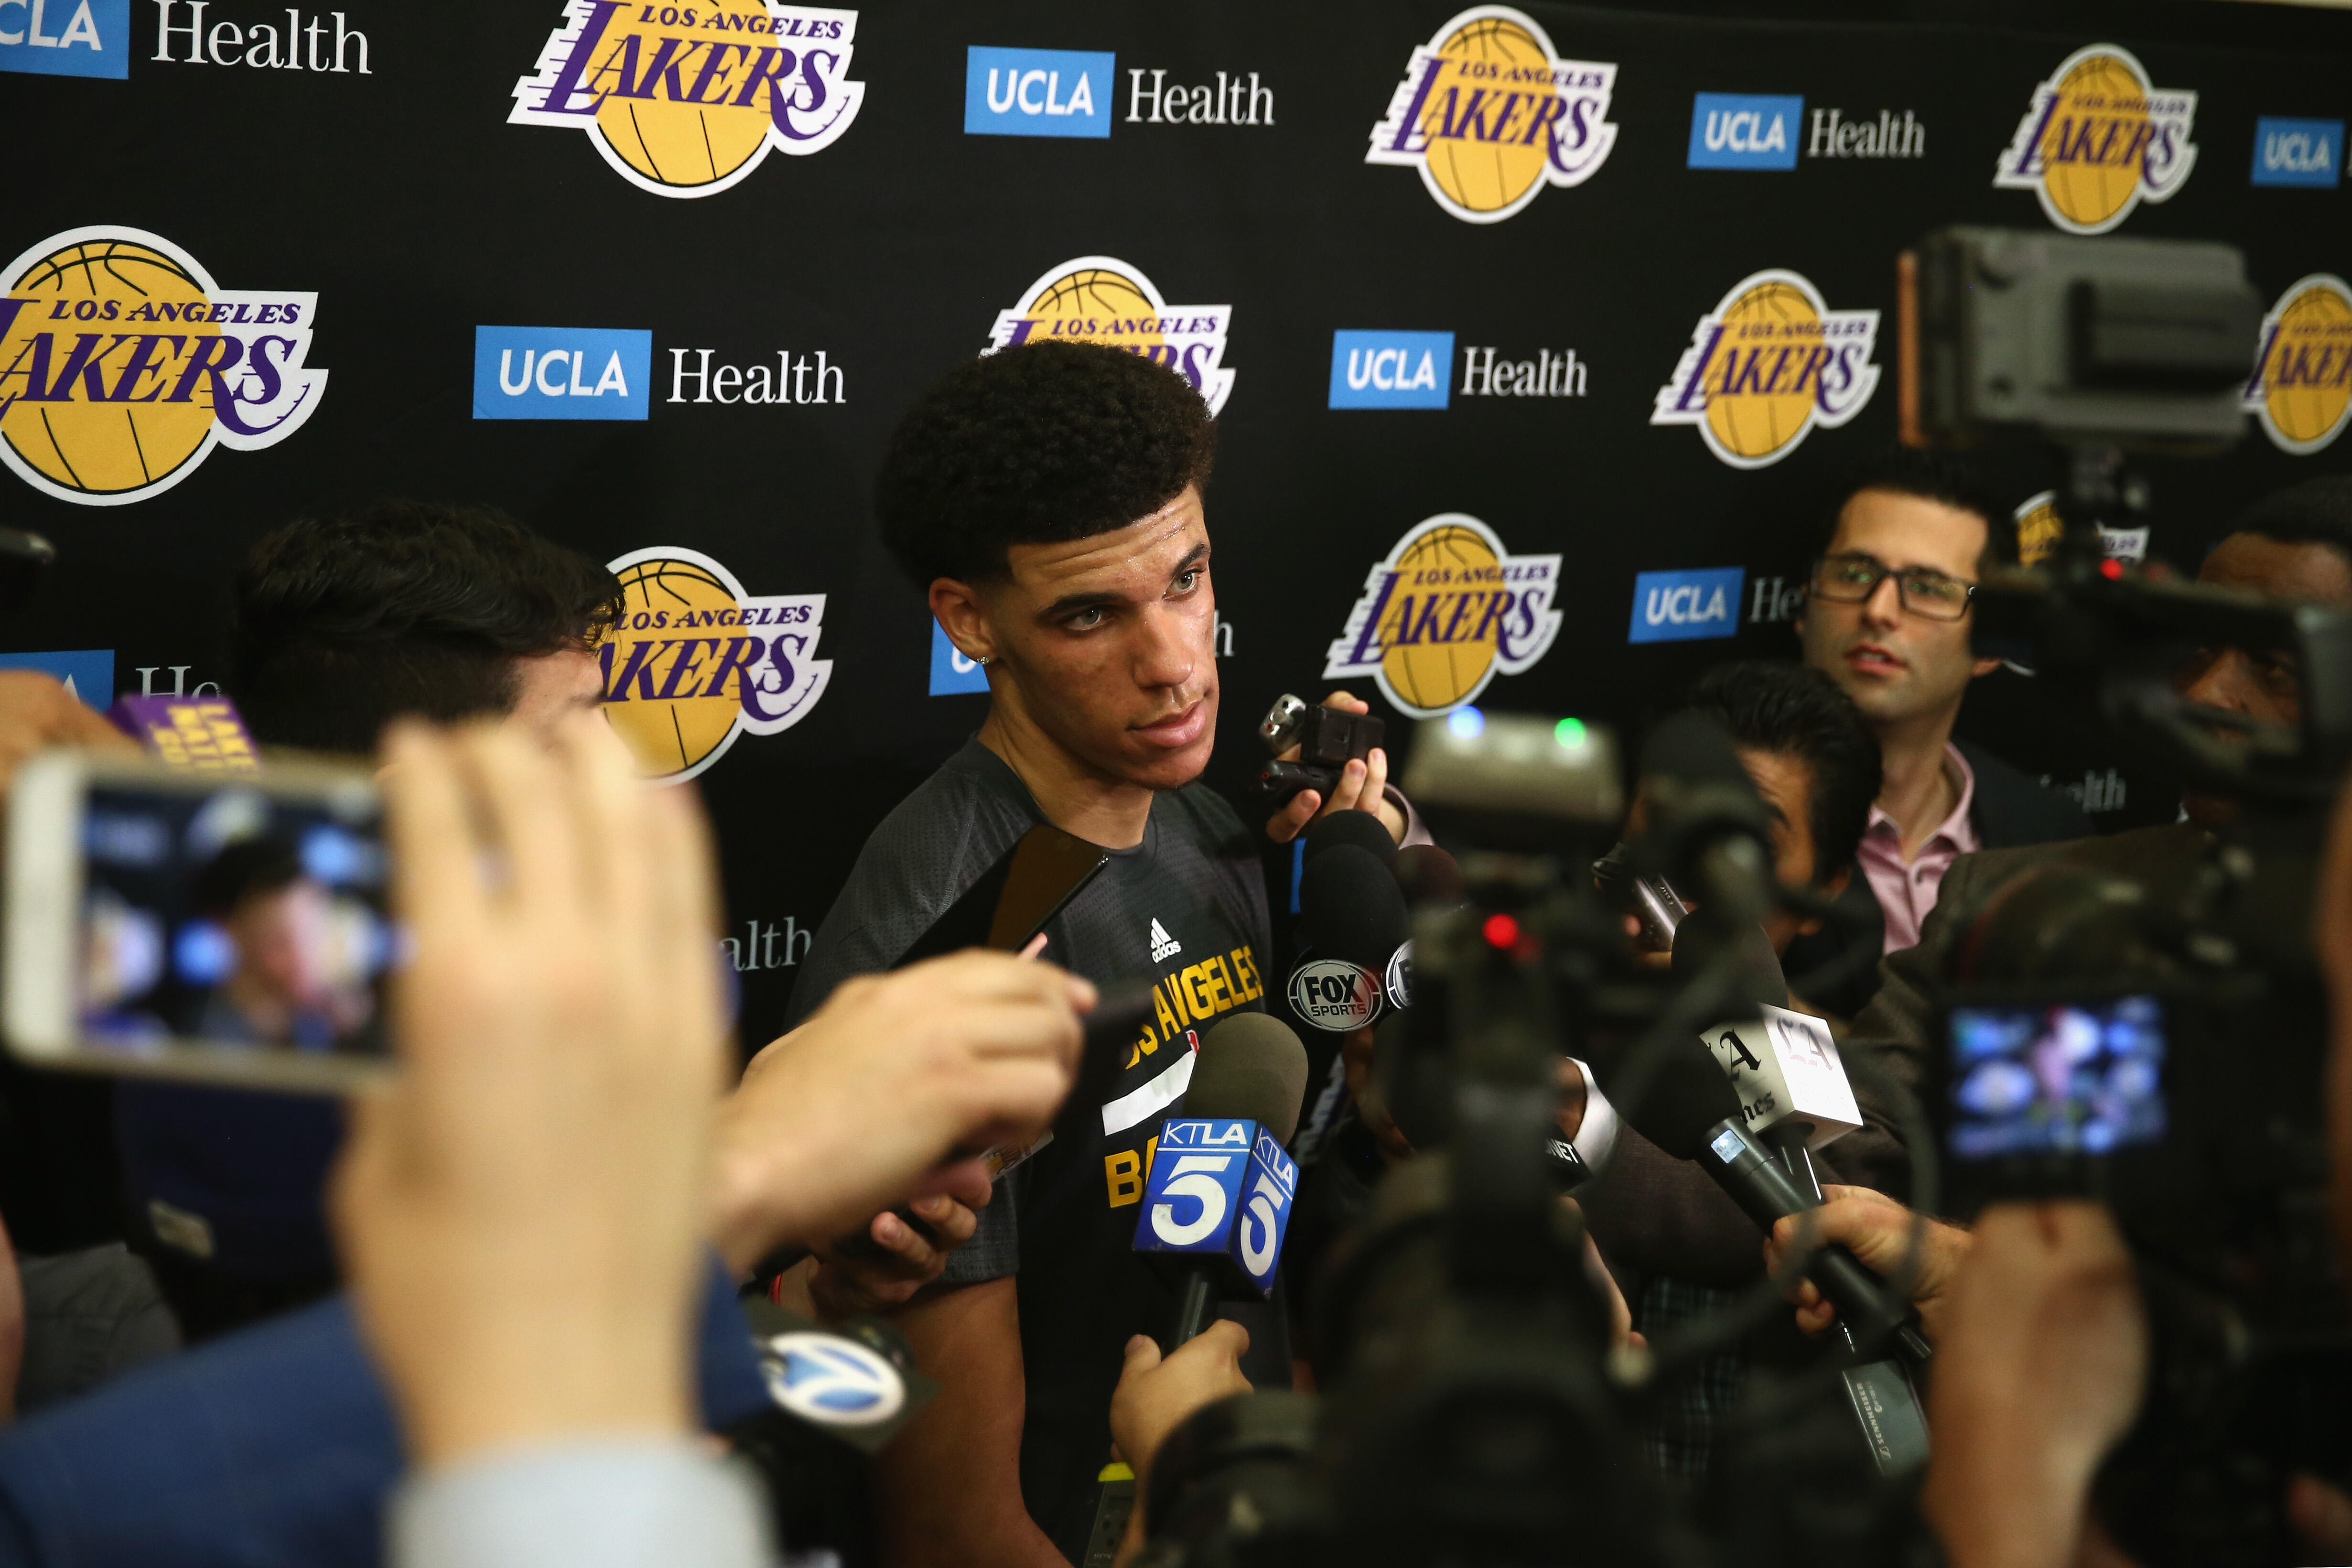 EL SEGUNDO, CA - JUNE 07:  NBA Prospect Lonzo Ball speaks with the media after a workout with the Los Angeles Lakers at Toyota Sports Center on June 7, 2017 in El Segundo, California.  (Photo by Sean M. Haffey/Getty Images)